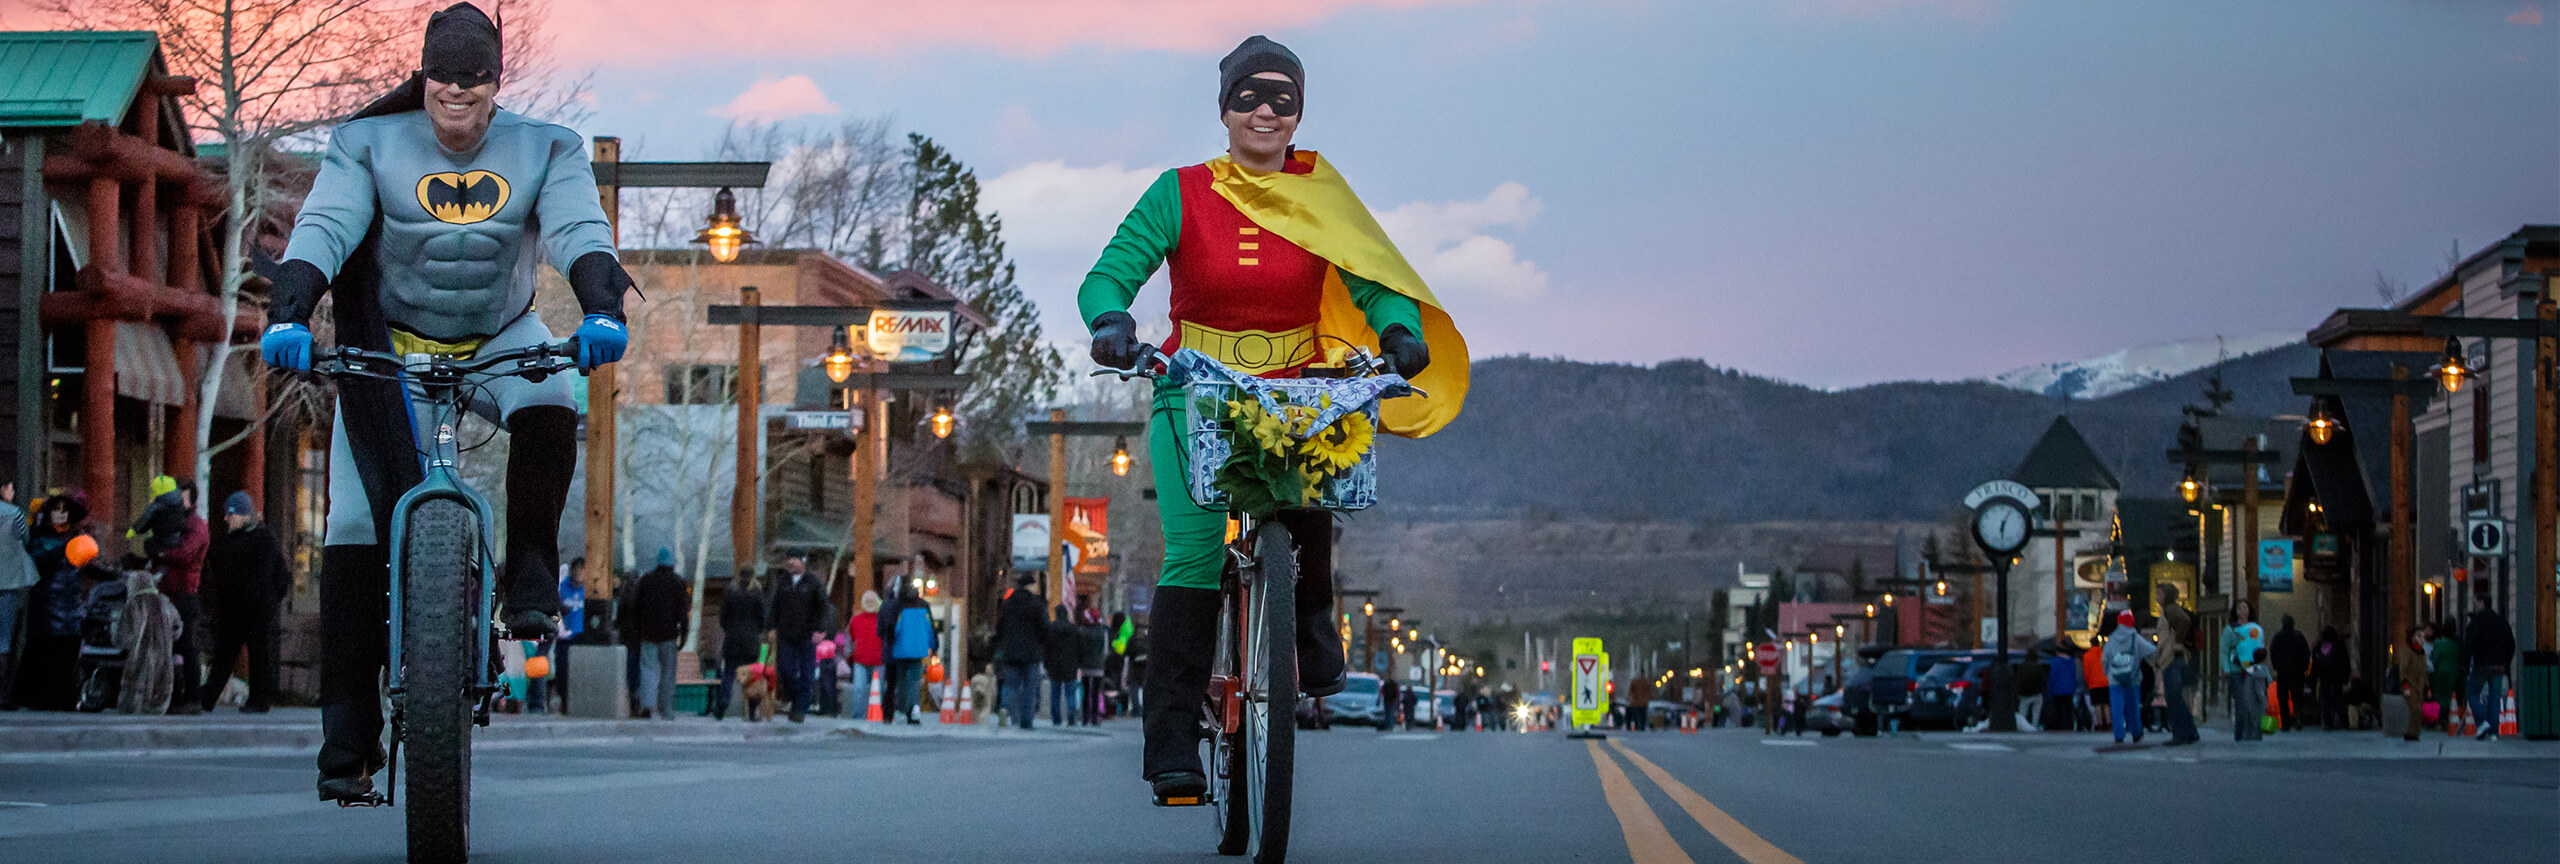 Man and woman dressed as super heroes riding bikes on Frisco Main Street